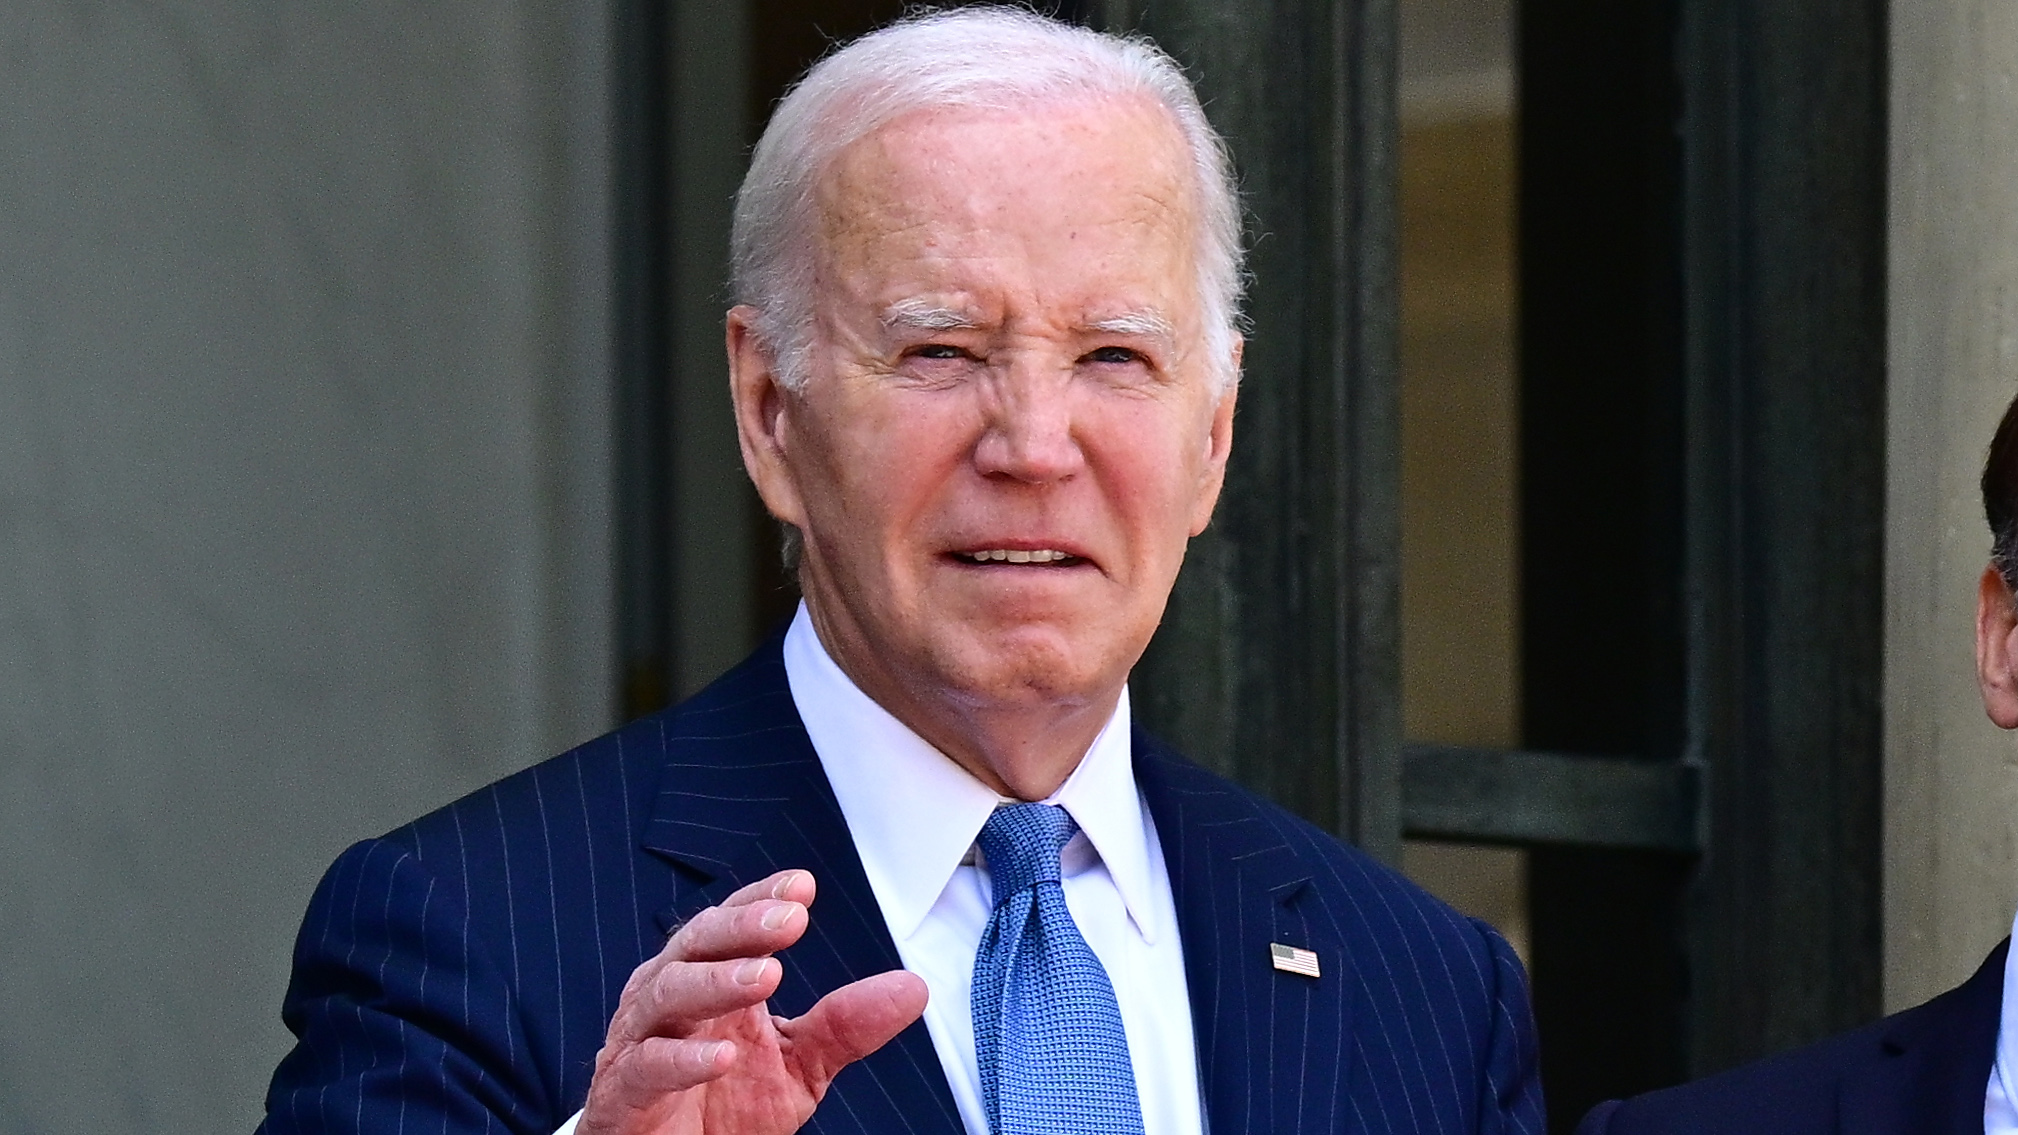 Report: Biden Plans to Grant Legal Status to Hundreds of Thousands of Undocumented Immigrants